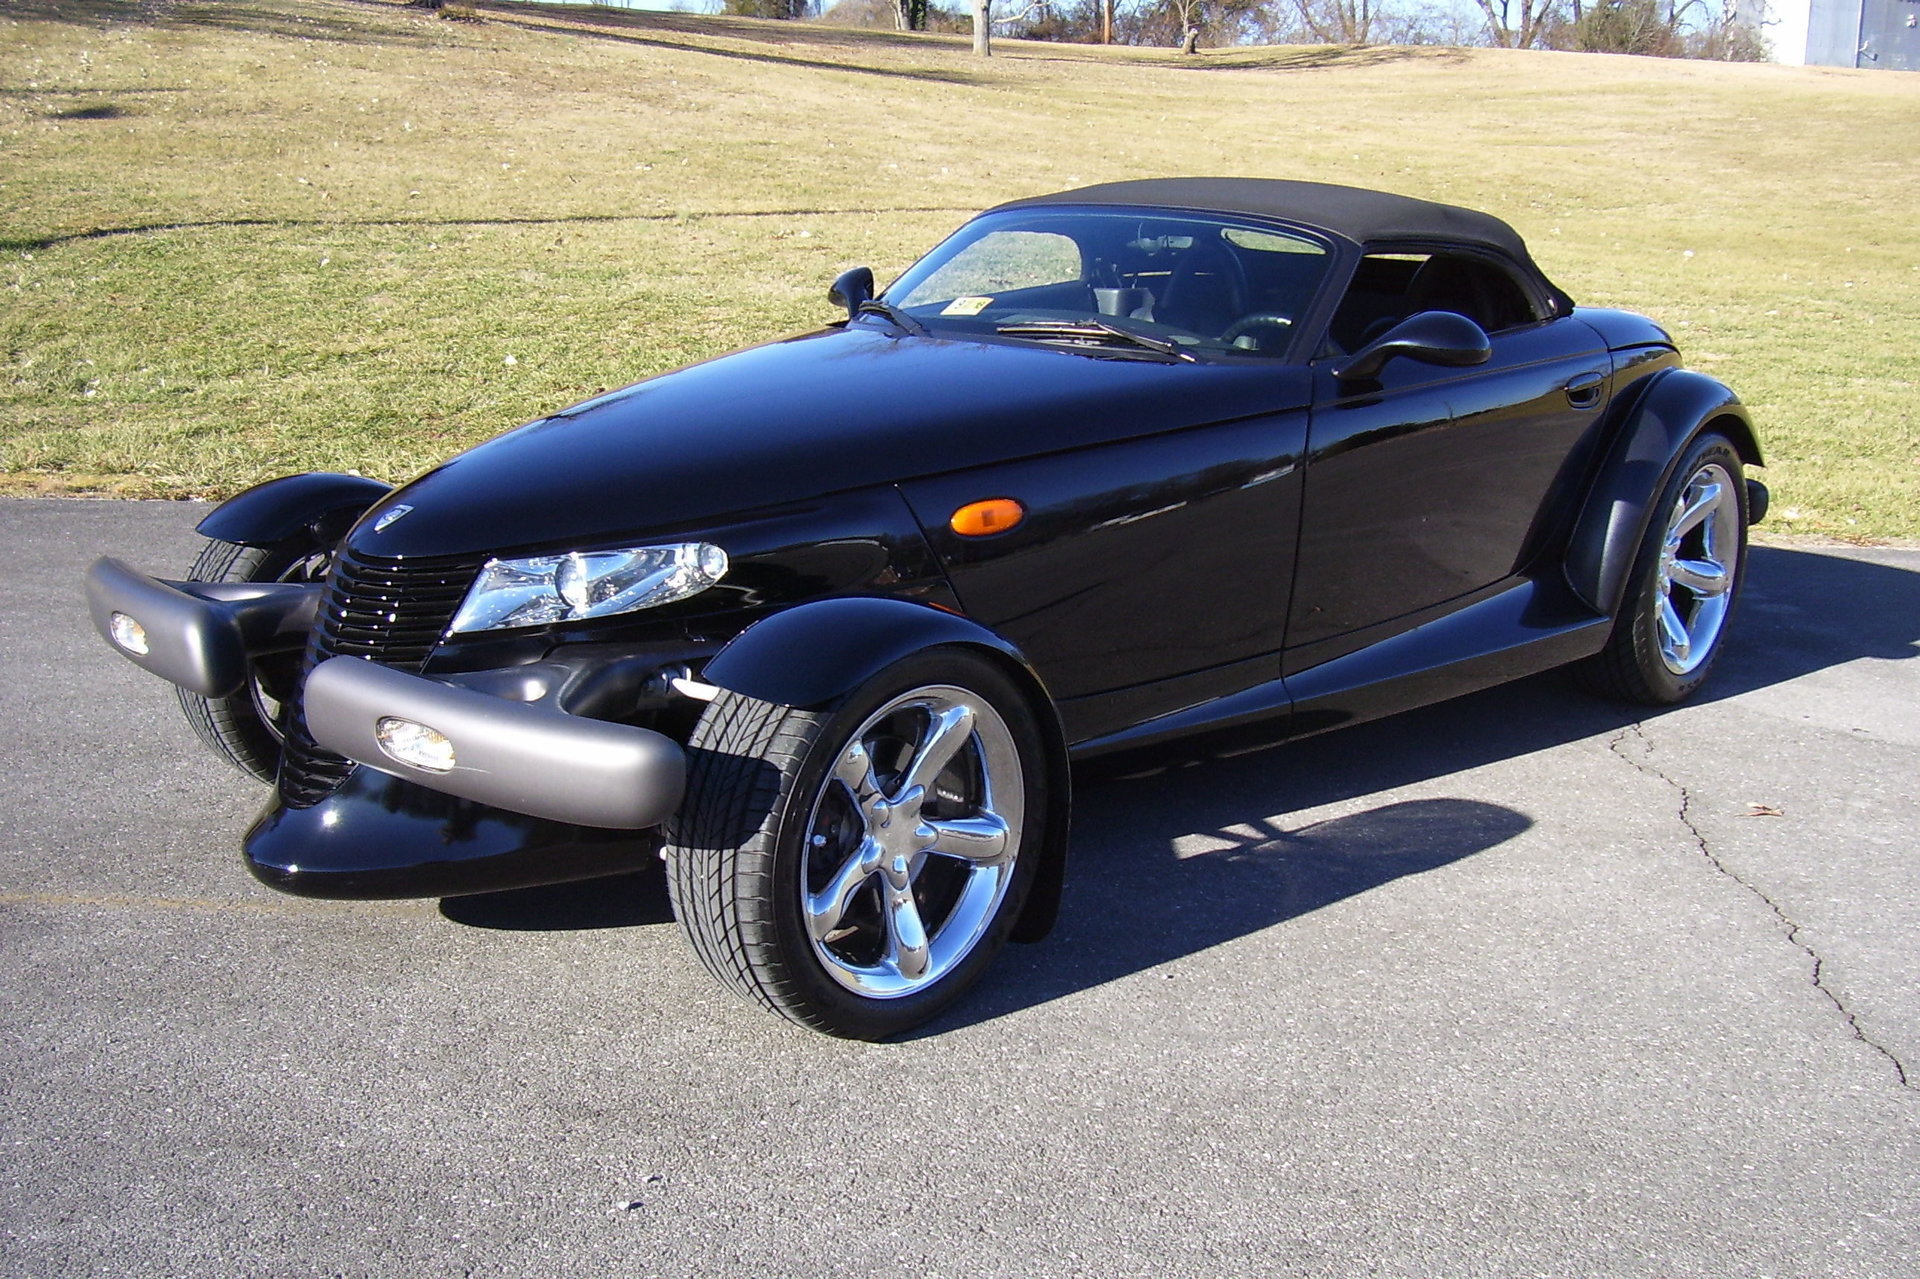 vehicles, black car, car, plymouth, plymouth prowler